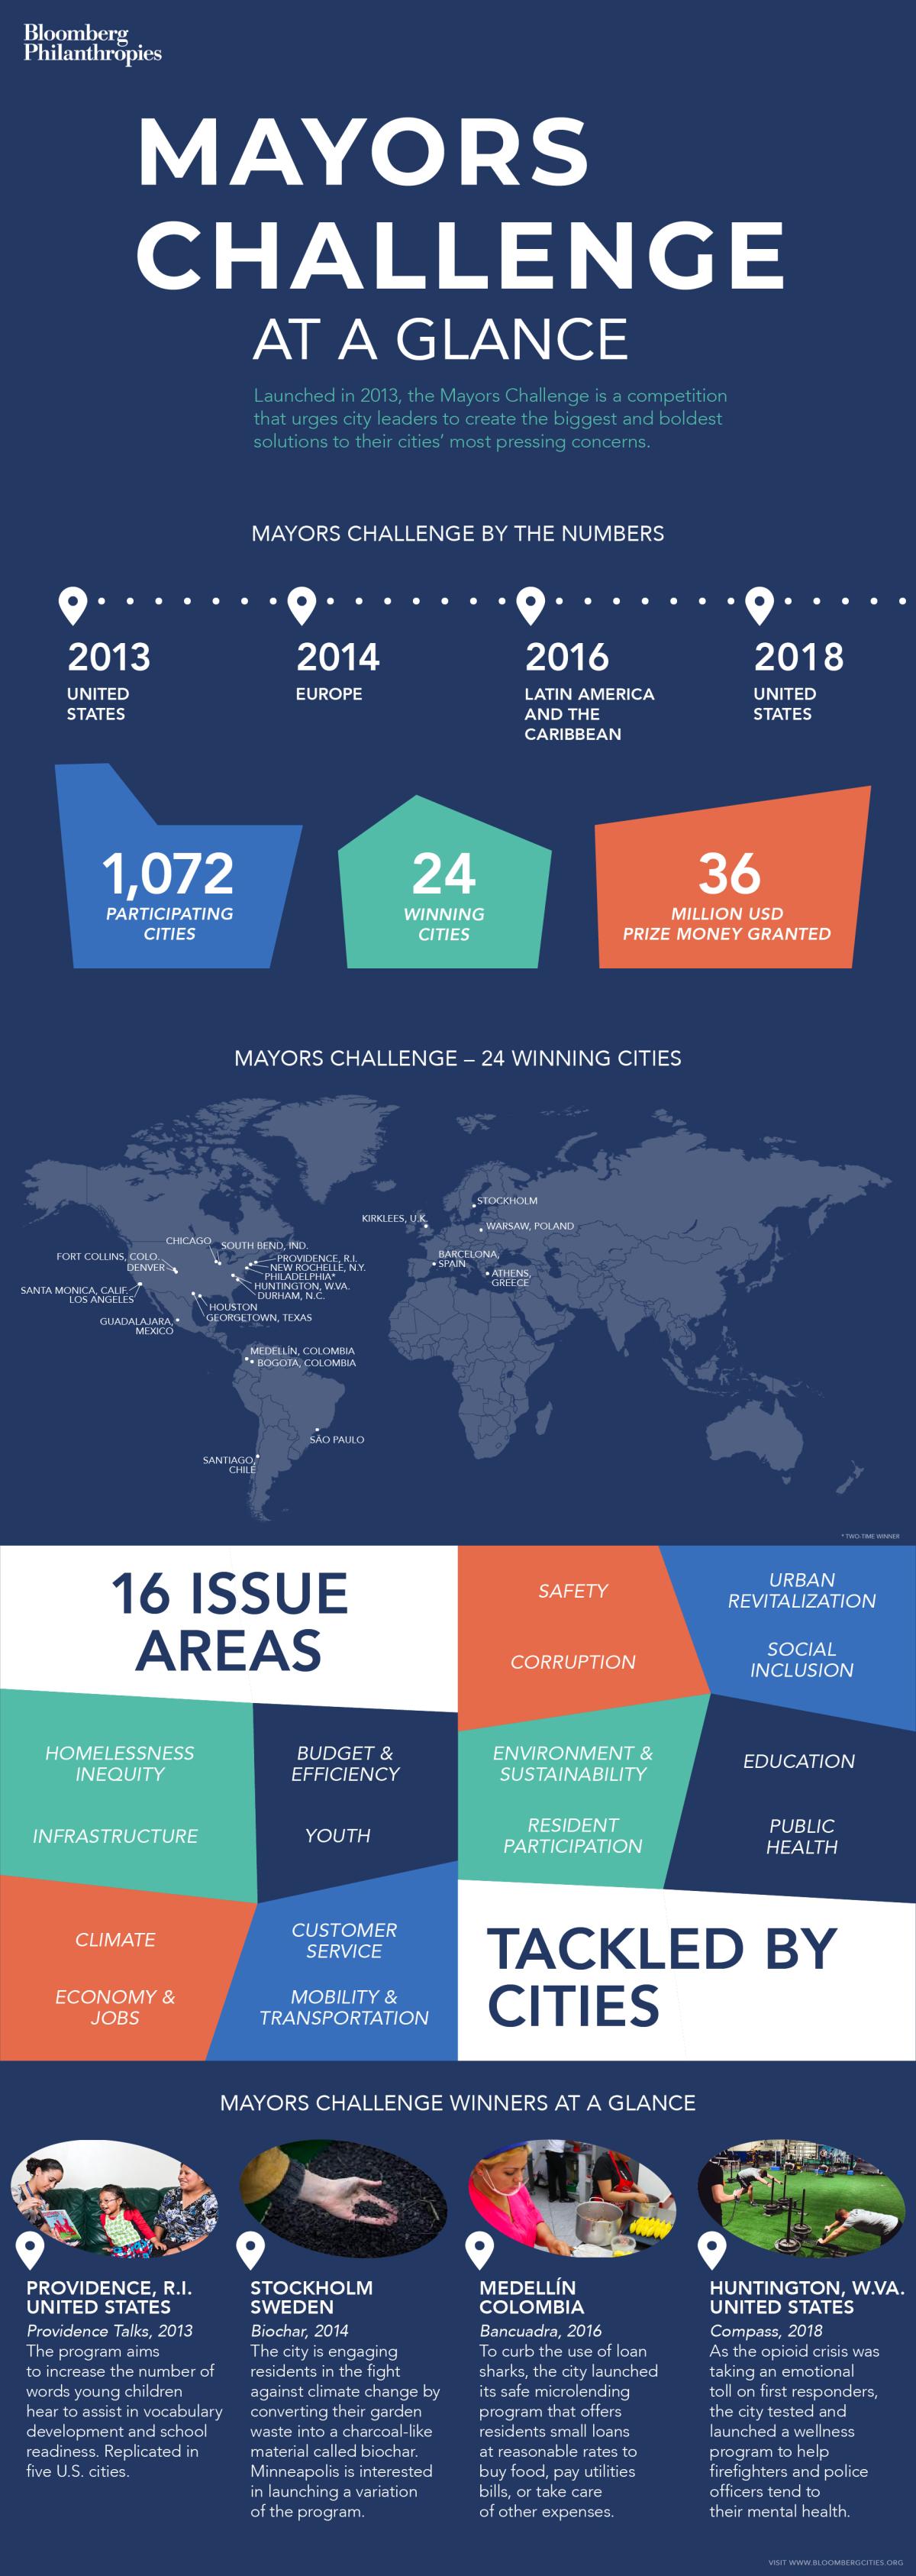 Infographic highlighting the Mayors Challenge since its launch in 2013